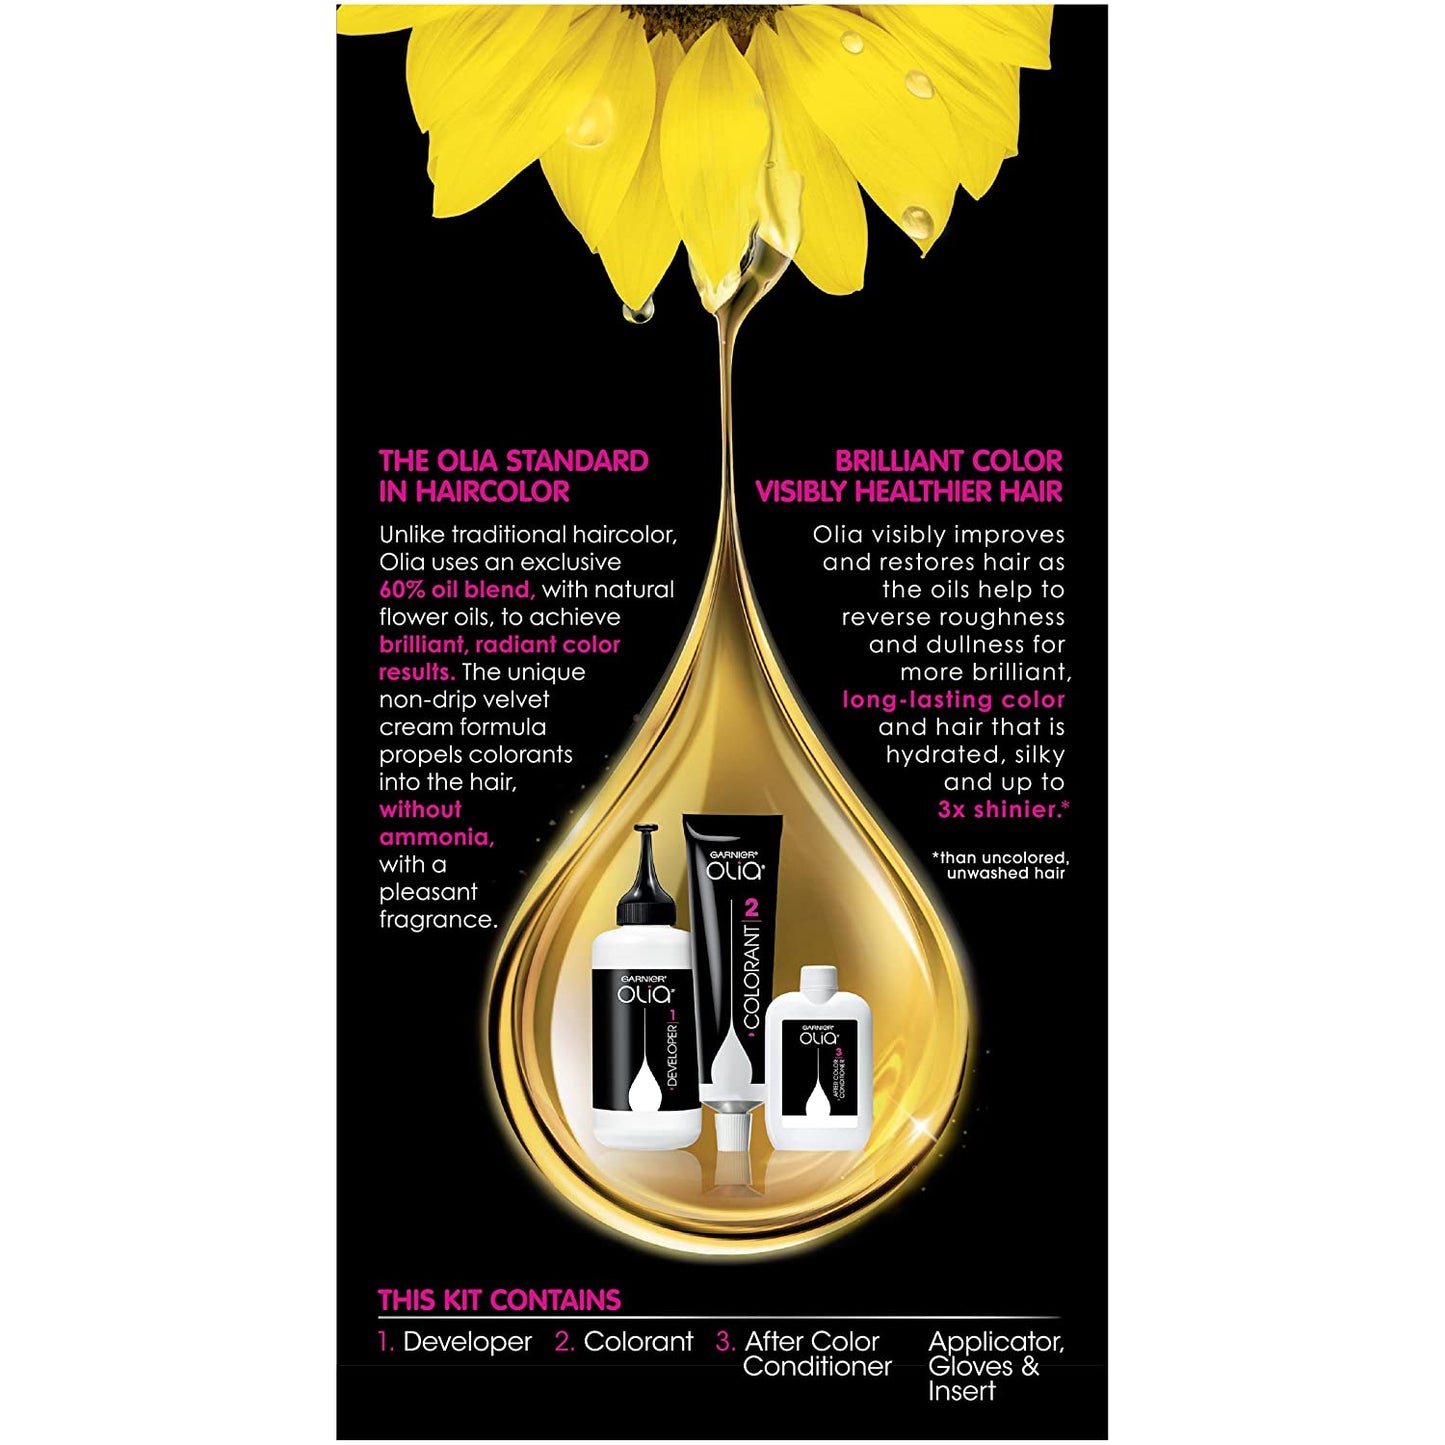 Garnier Olia Brilliant Permanent Hair Color with Natural Flower Oils, Ammonia-Free in 6.0 Light Brown